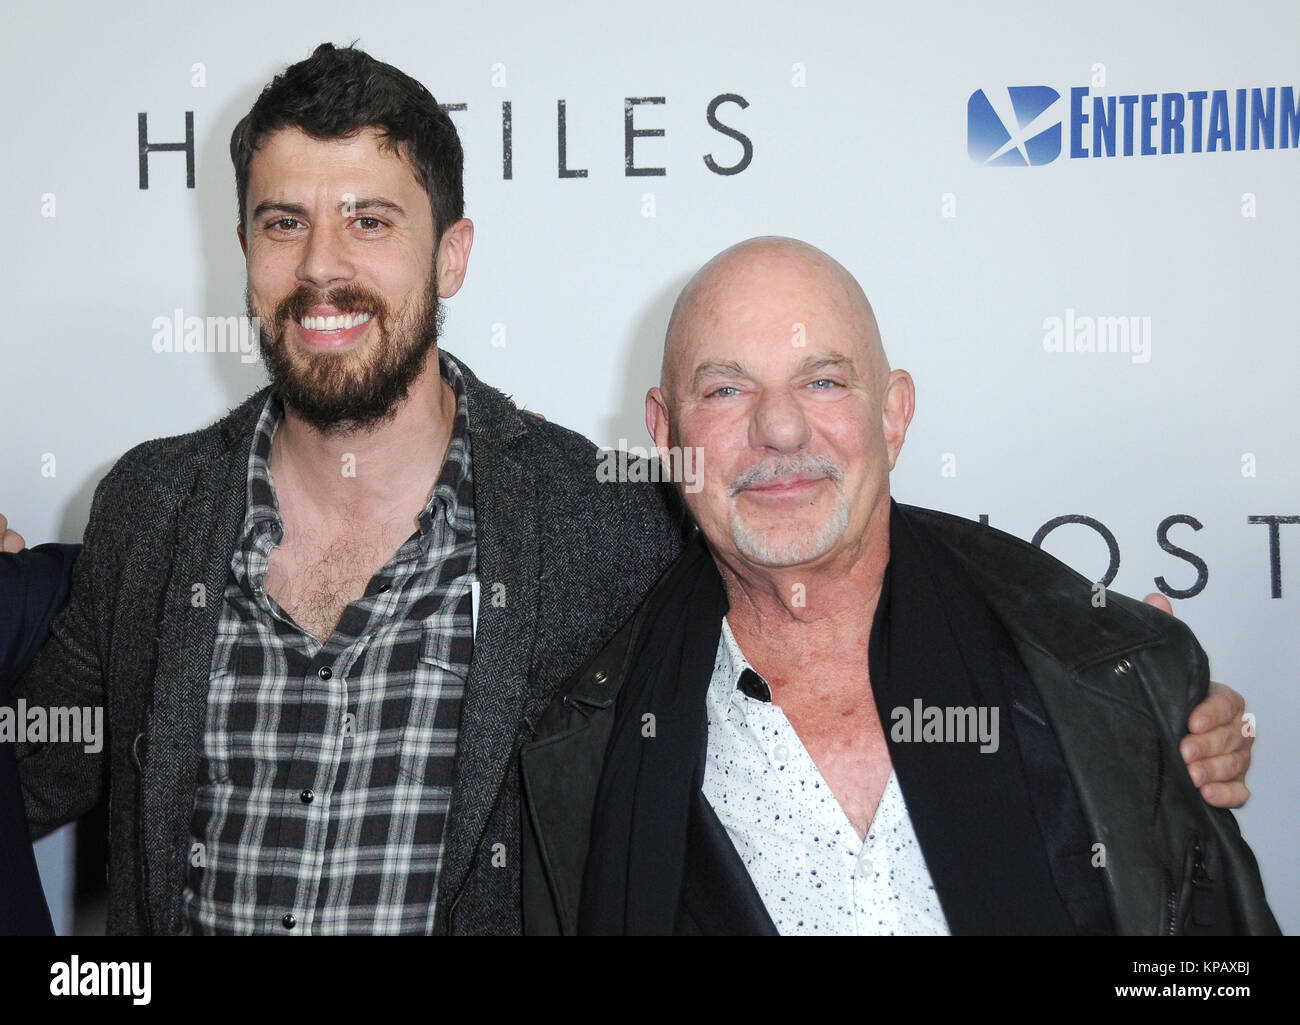 Beverly Hills, California, USA. 14th December, 2017. (L-R) Actor Tony Kebbell and producer/director Rob Cohen attend the Los Angeles premiere of Entertainment Studios Motion Pictures' 'Hostiles' at Samuel Goldwyn Theater on December 14, 2017 in Beverly Hills, California. Photo by Barry King/Alamy Live News Stock Photo